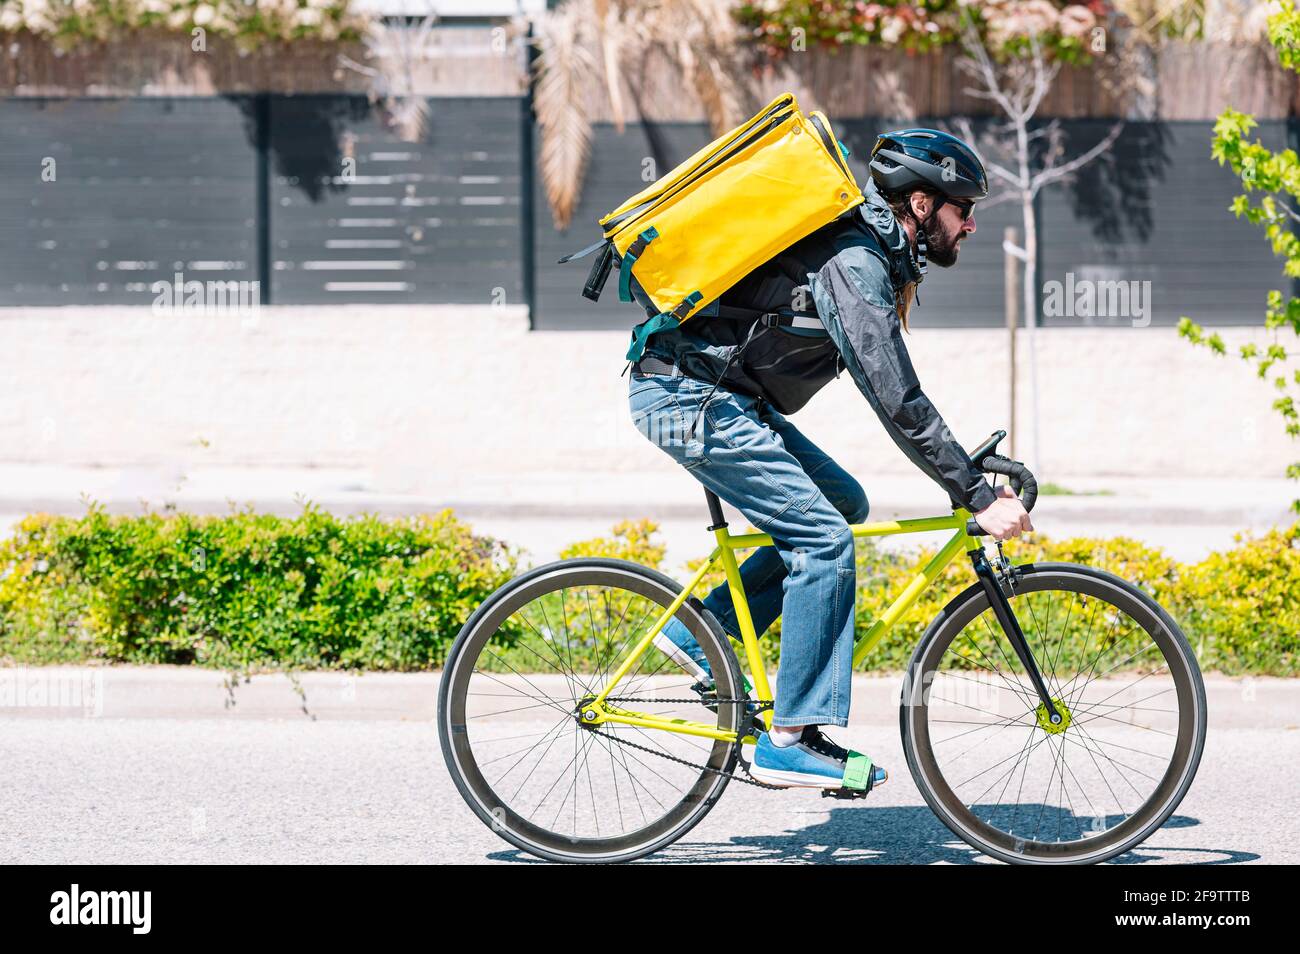 Man who works delivering food by courier at high speed through the city. Stock Photo